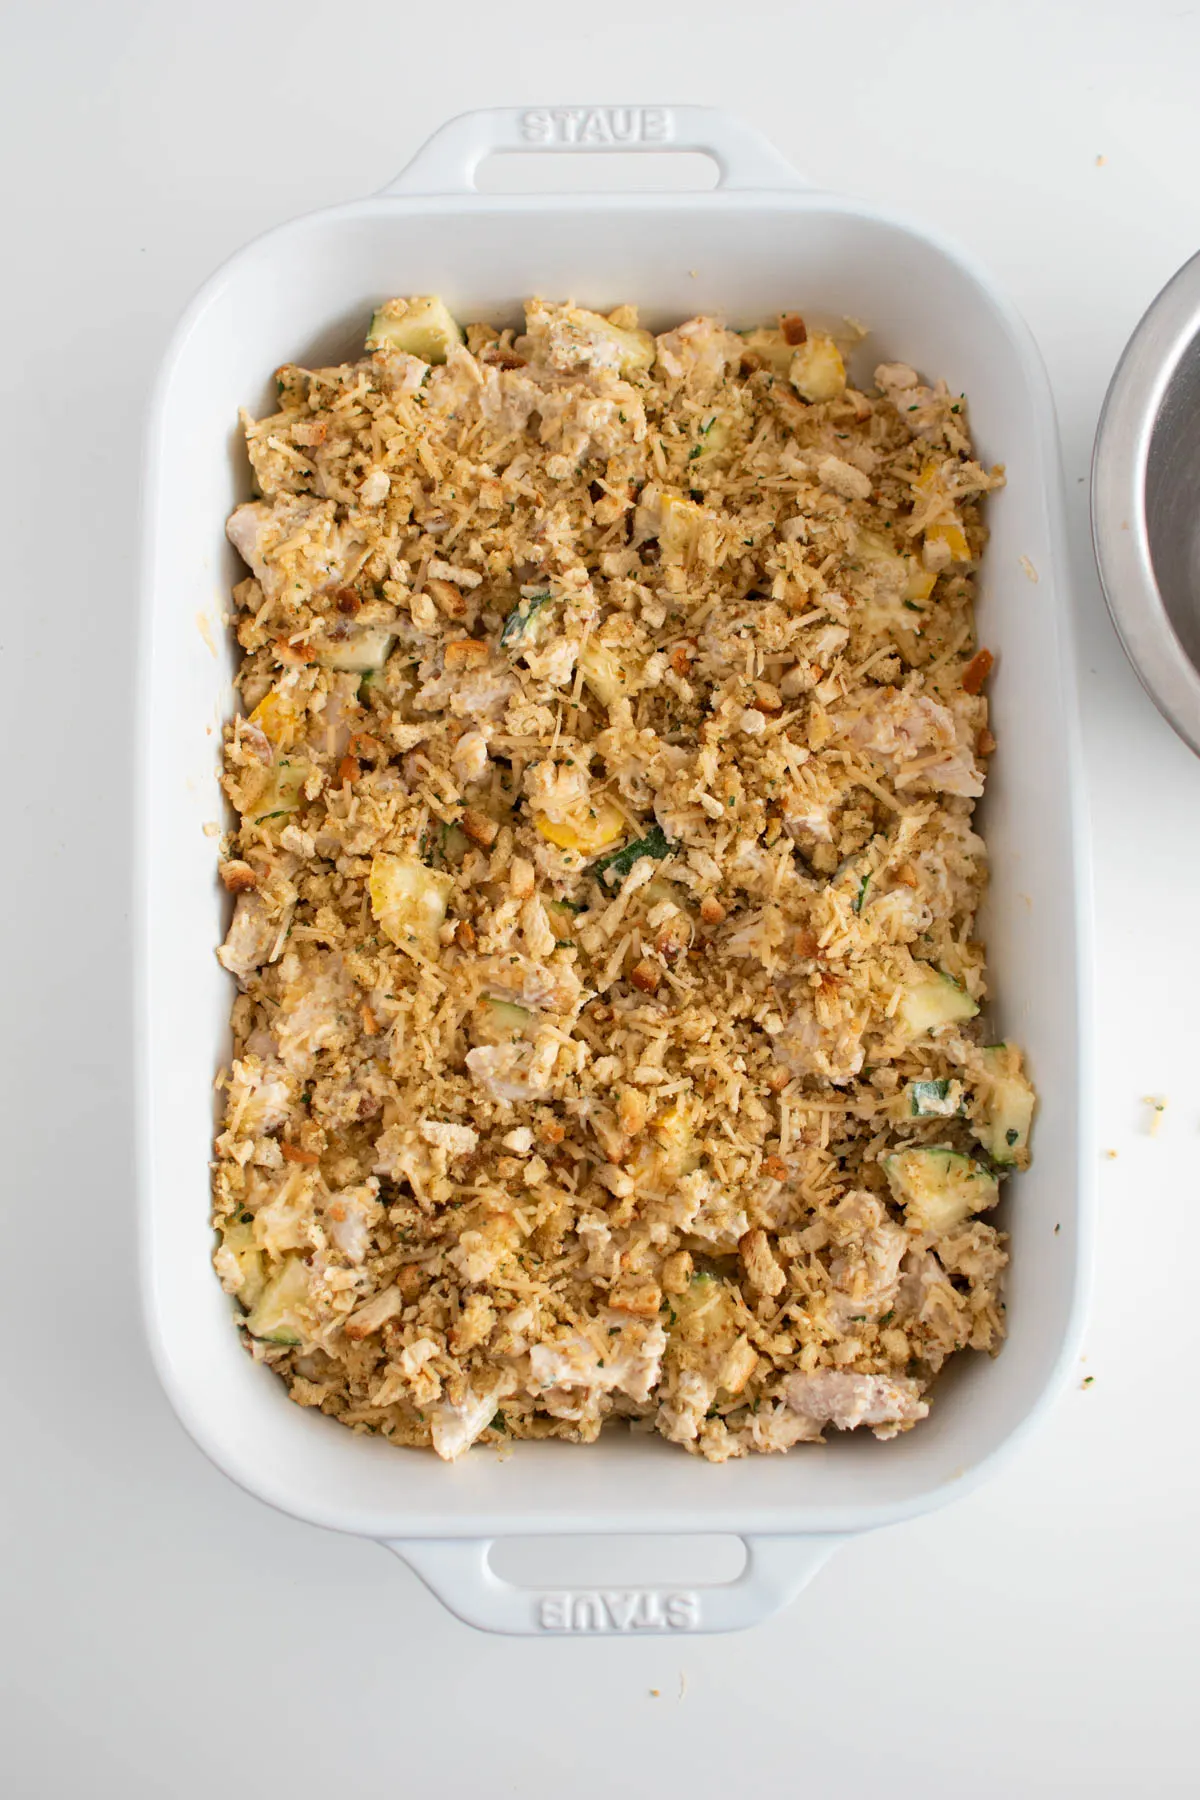 Unbaked chicken zucchini casserole in white baking dish on white table.